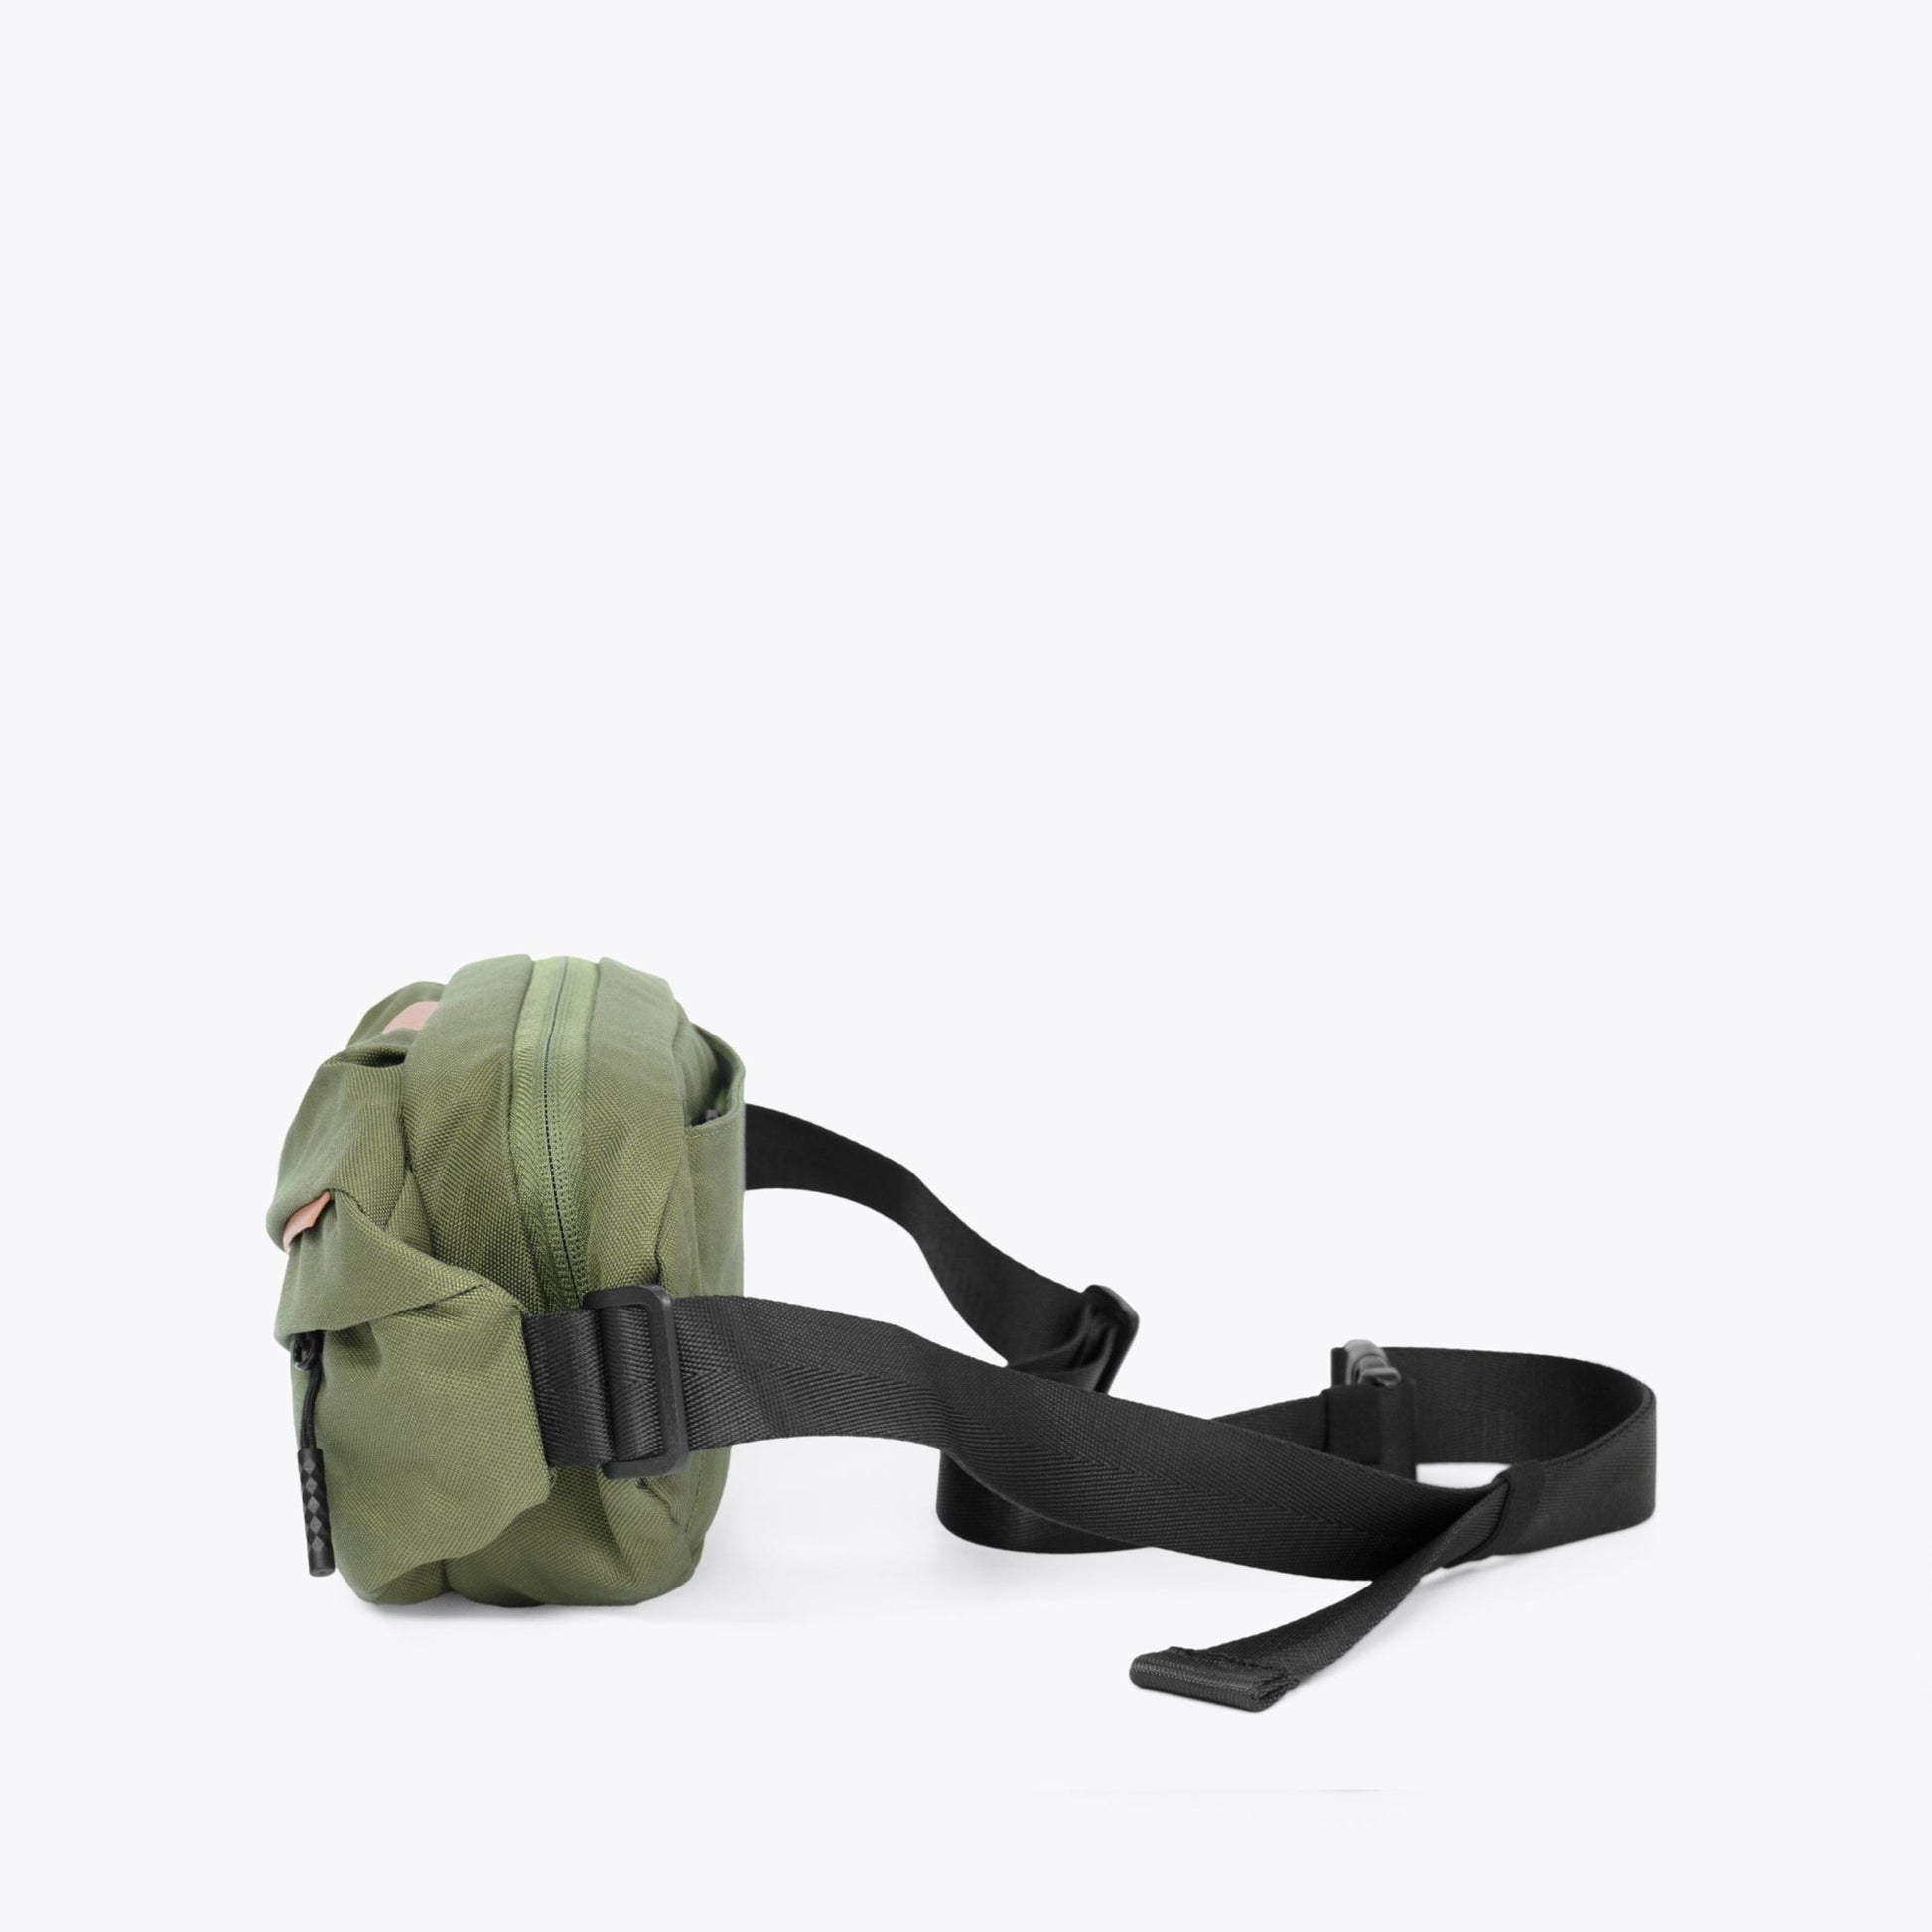 EARTH Chestbag - Olive - www.countryhide.com